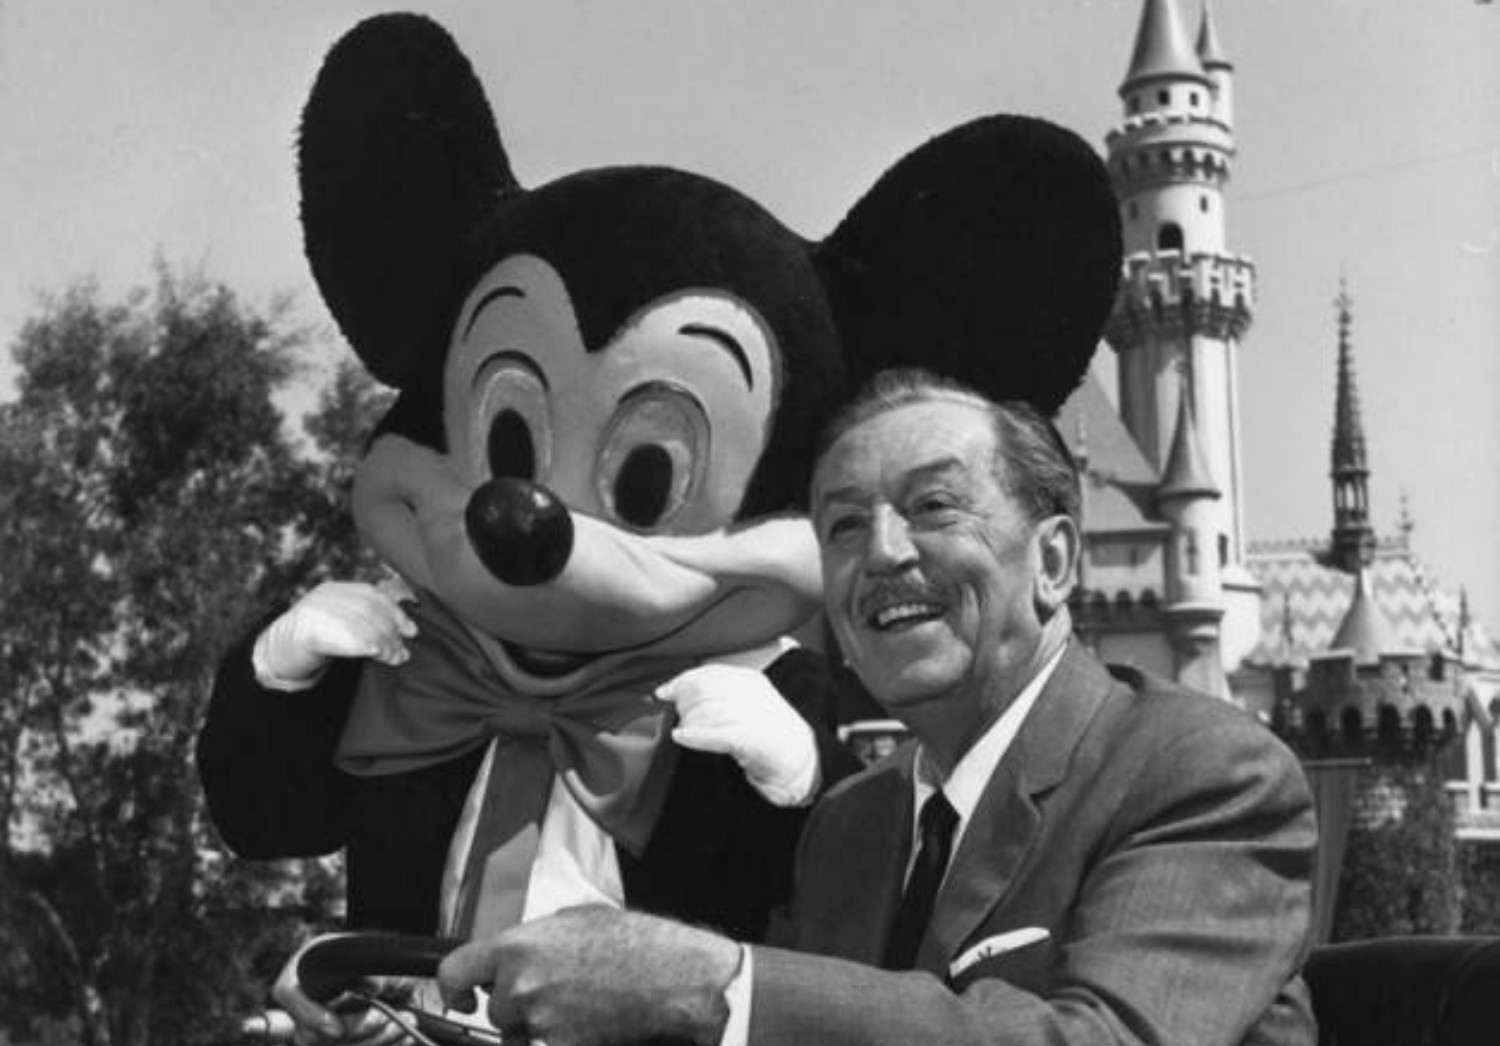 mickey mouse facts - Walt Disney was once filmed physically performing the role of Mickey Mouse as a reference for the animators of a 1930s short. Sadly, no known copies of the footage exists.-u/-Paraprax-